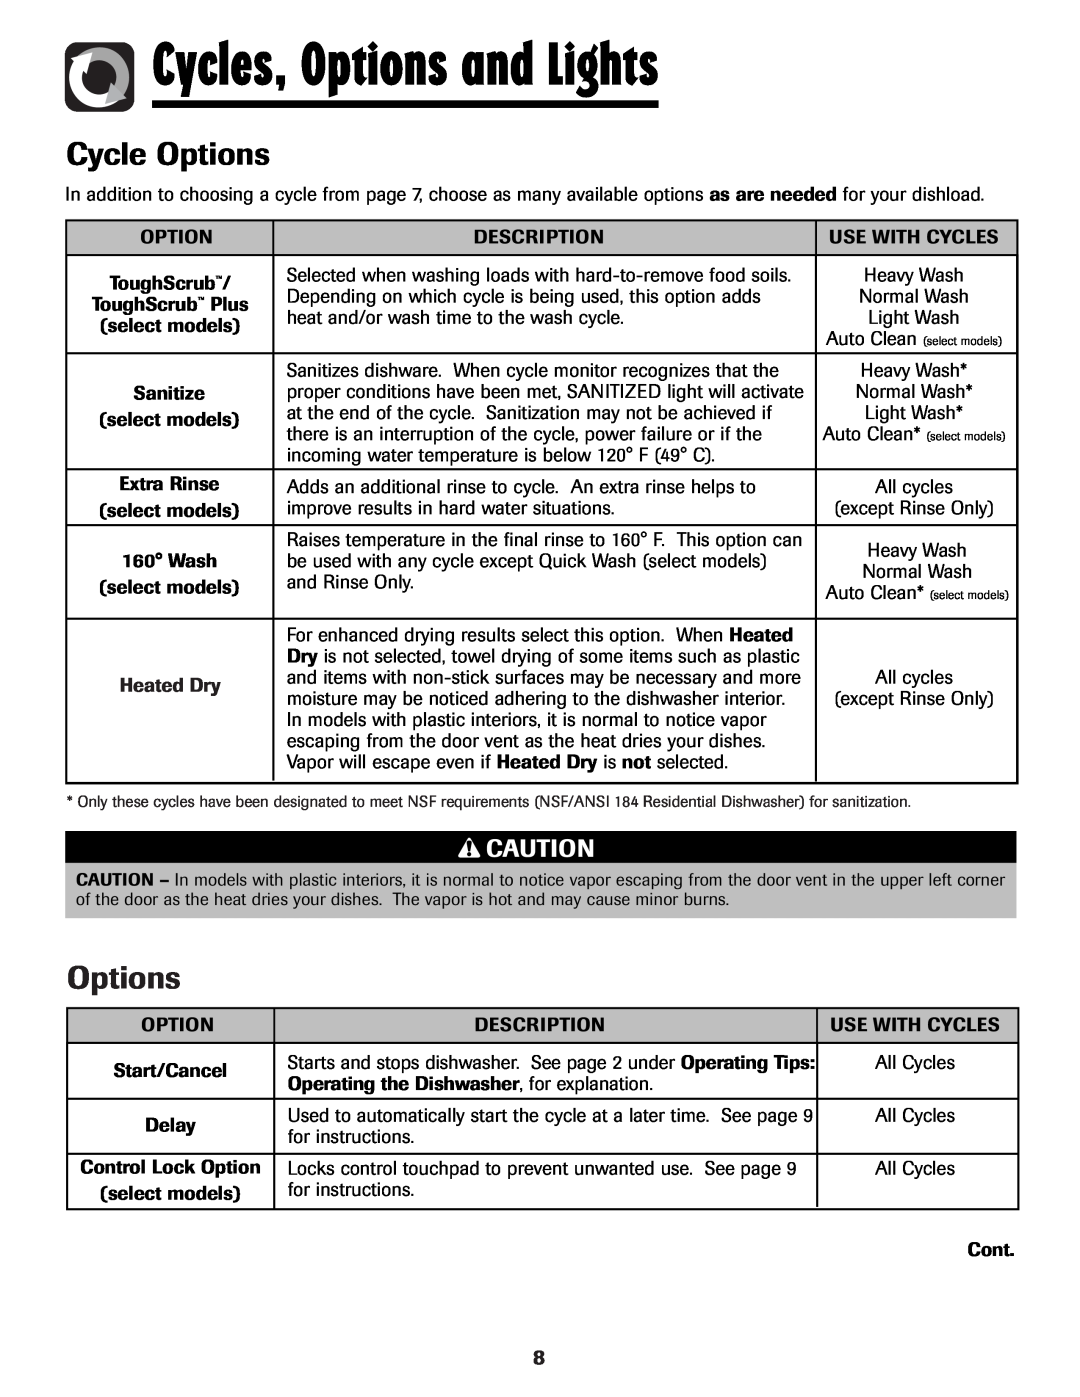 Maytag MDB-5 warranty Cycle Options, Cycles, Options and Lights 